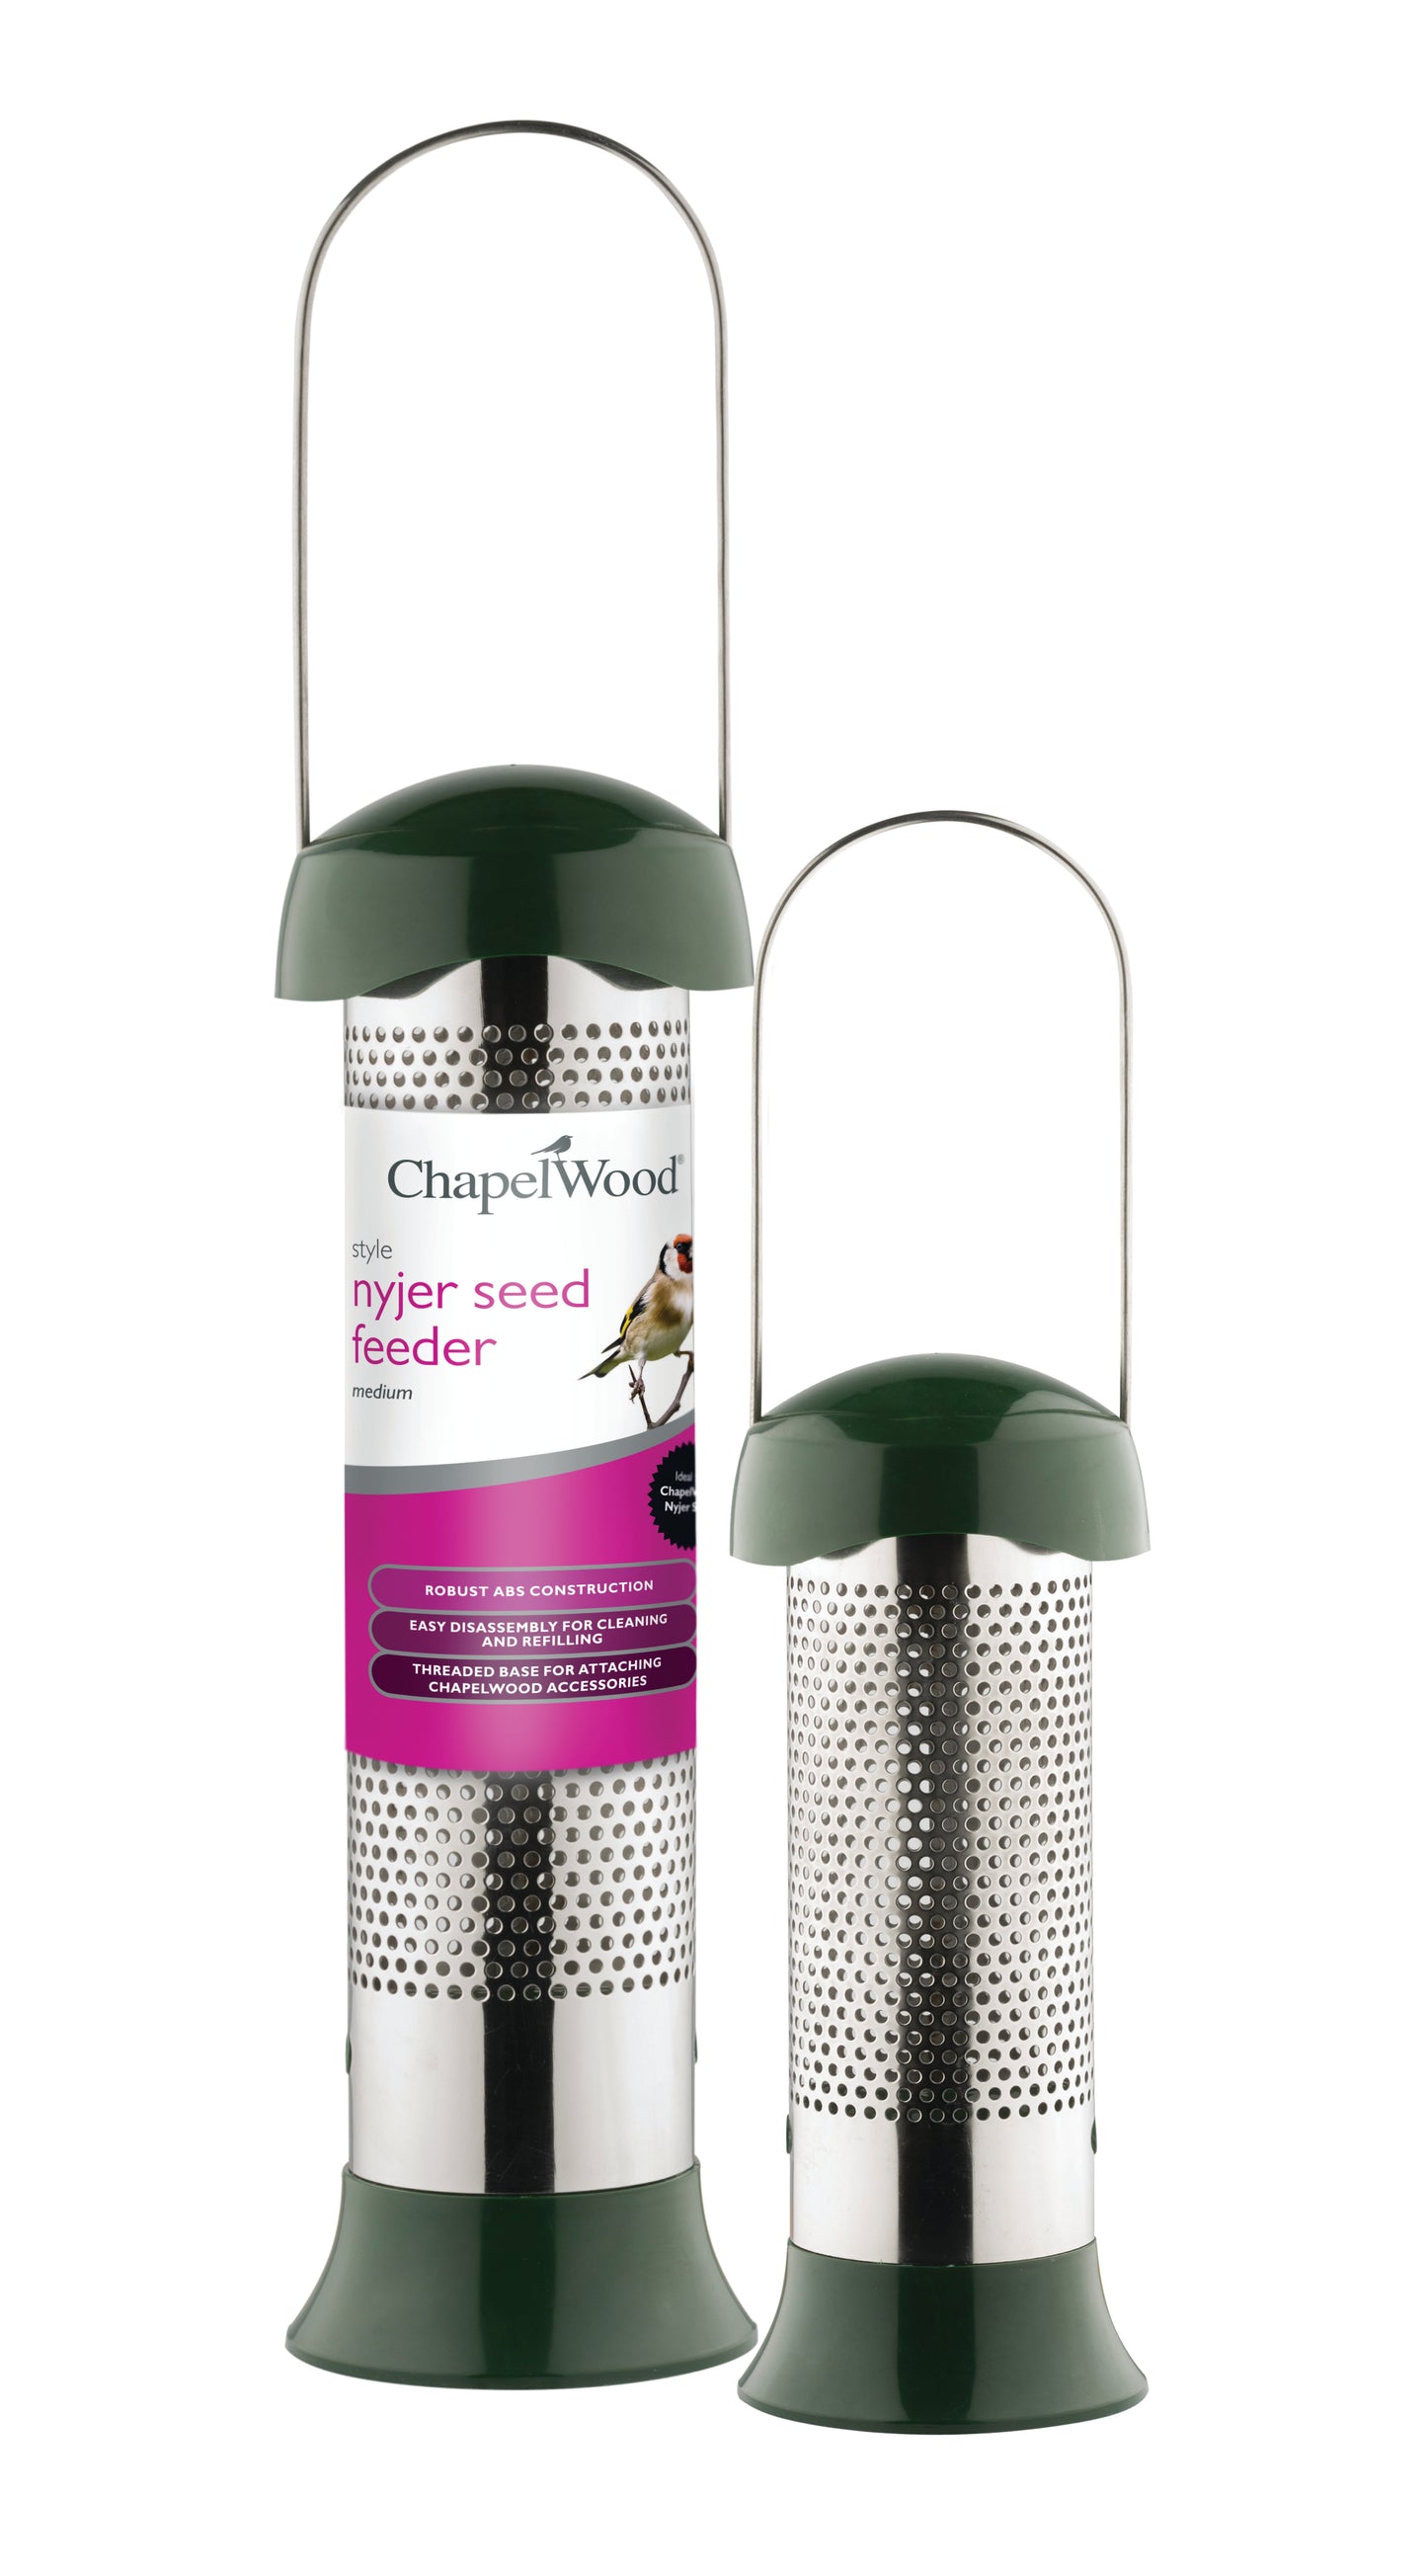 Chapelwood Small Style Nyjer Seed Feeder